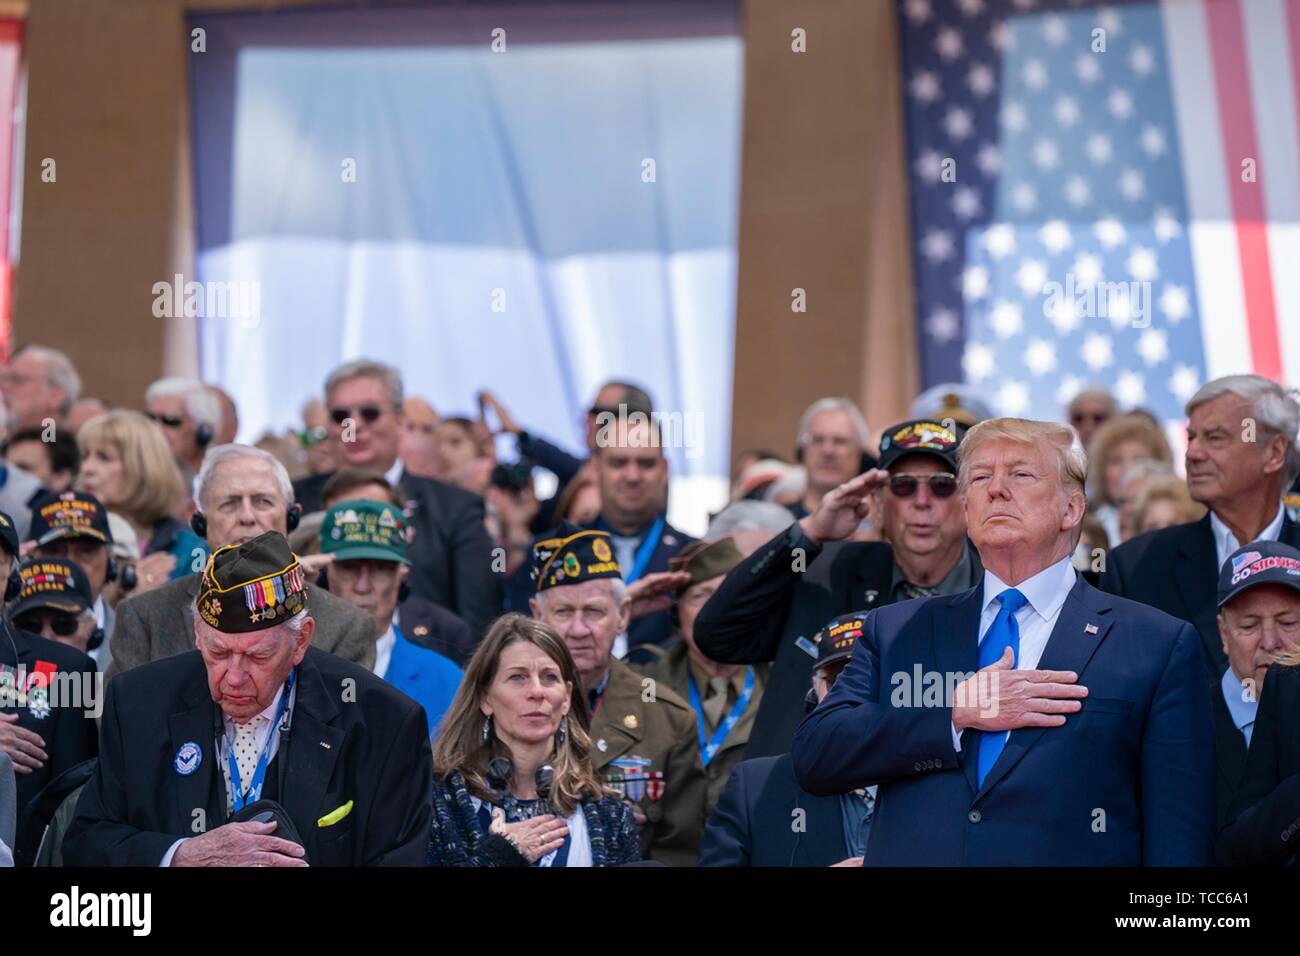 Colleville Sur Mer, France. 06th June, 2019. U.S. President Donald Trump stands for the national anthems during the commemoration ceremony marking the 75th D-Day Anniversary at the Normandy American Cemetery and Memorial June 6, 2019 in Colleville-sur-Mer, France. Thousands have converged on Normandy to commemorate the 75th anniversary of Operation Overlord, the WWII Allied invasion commonly known as D-Day. Credit: Planetpix/Alamy Live News Stock Photo